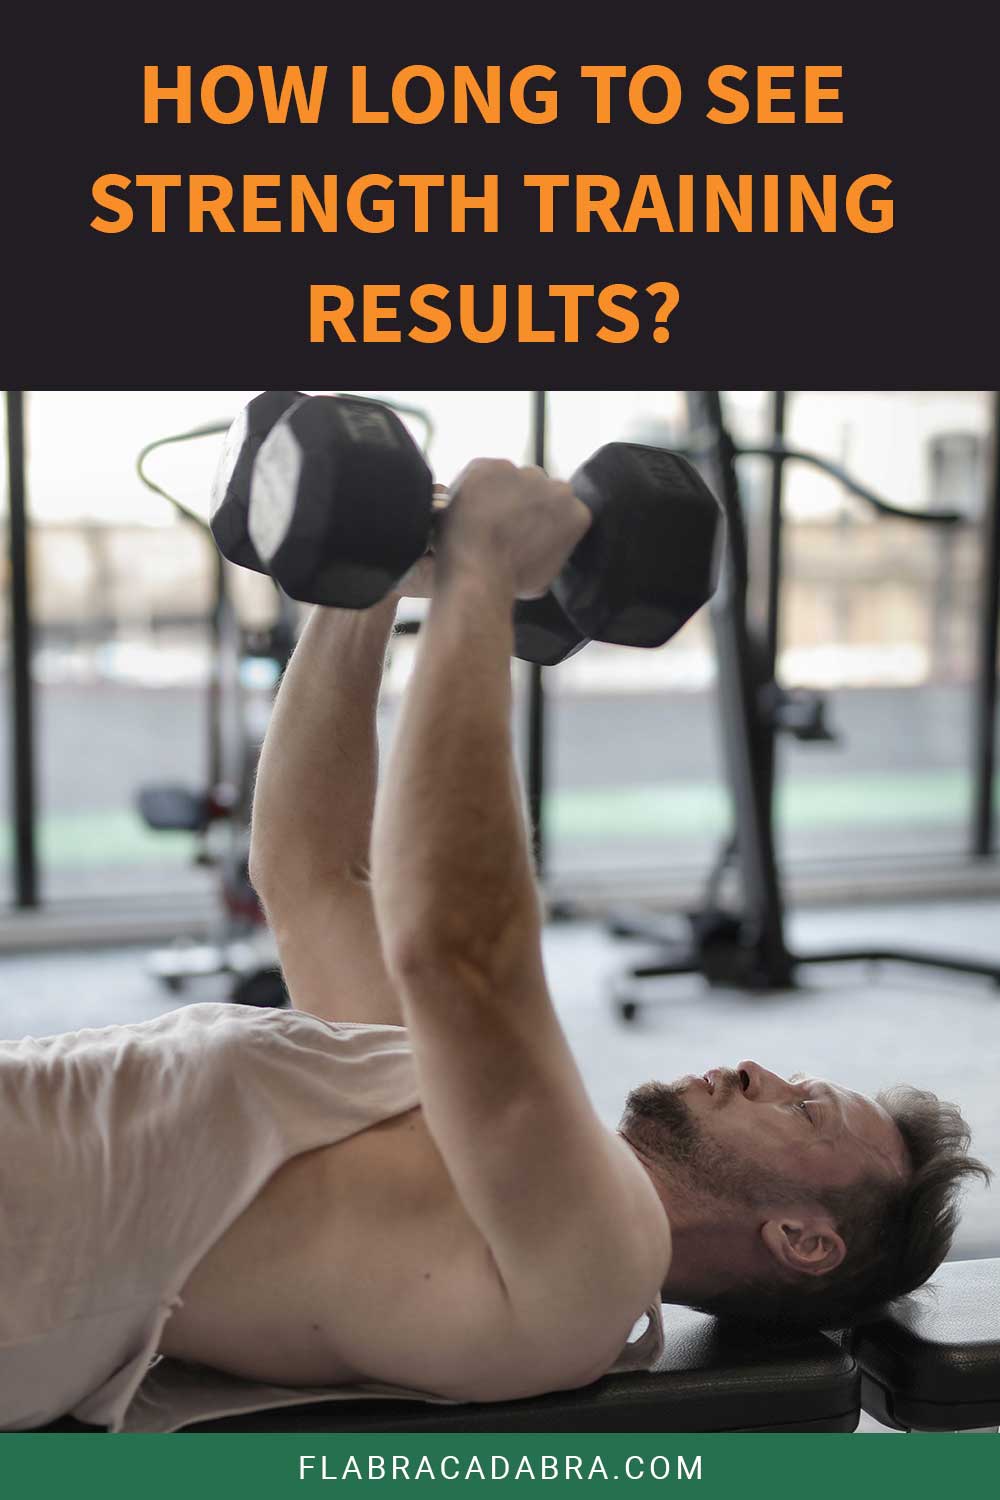 Man wearing white tank top is lifting weight - How Long to See Strength Training Results?